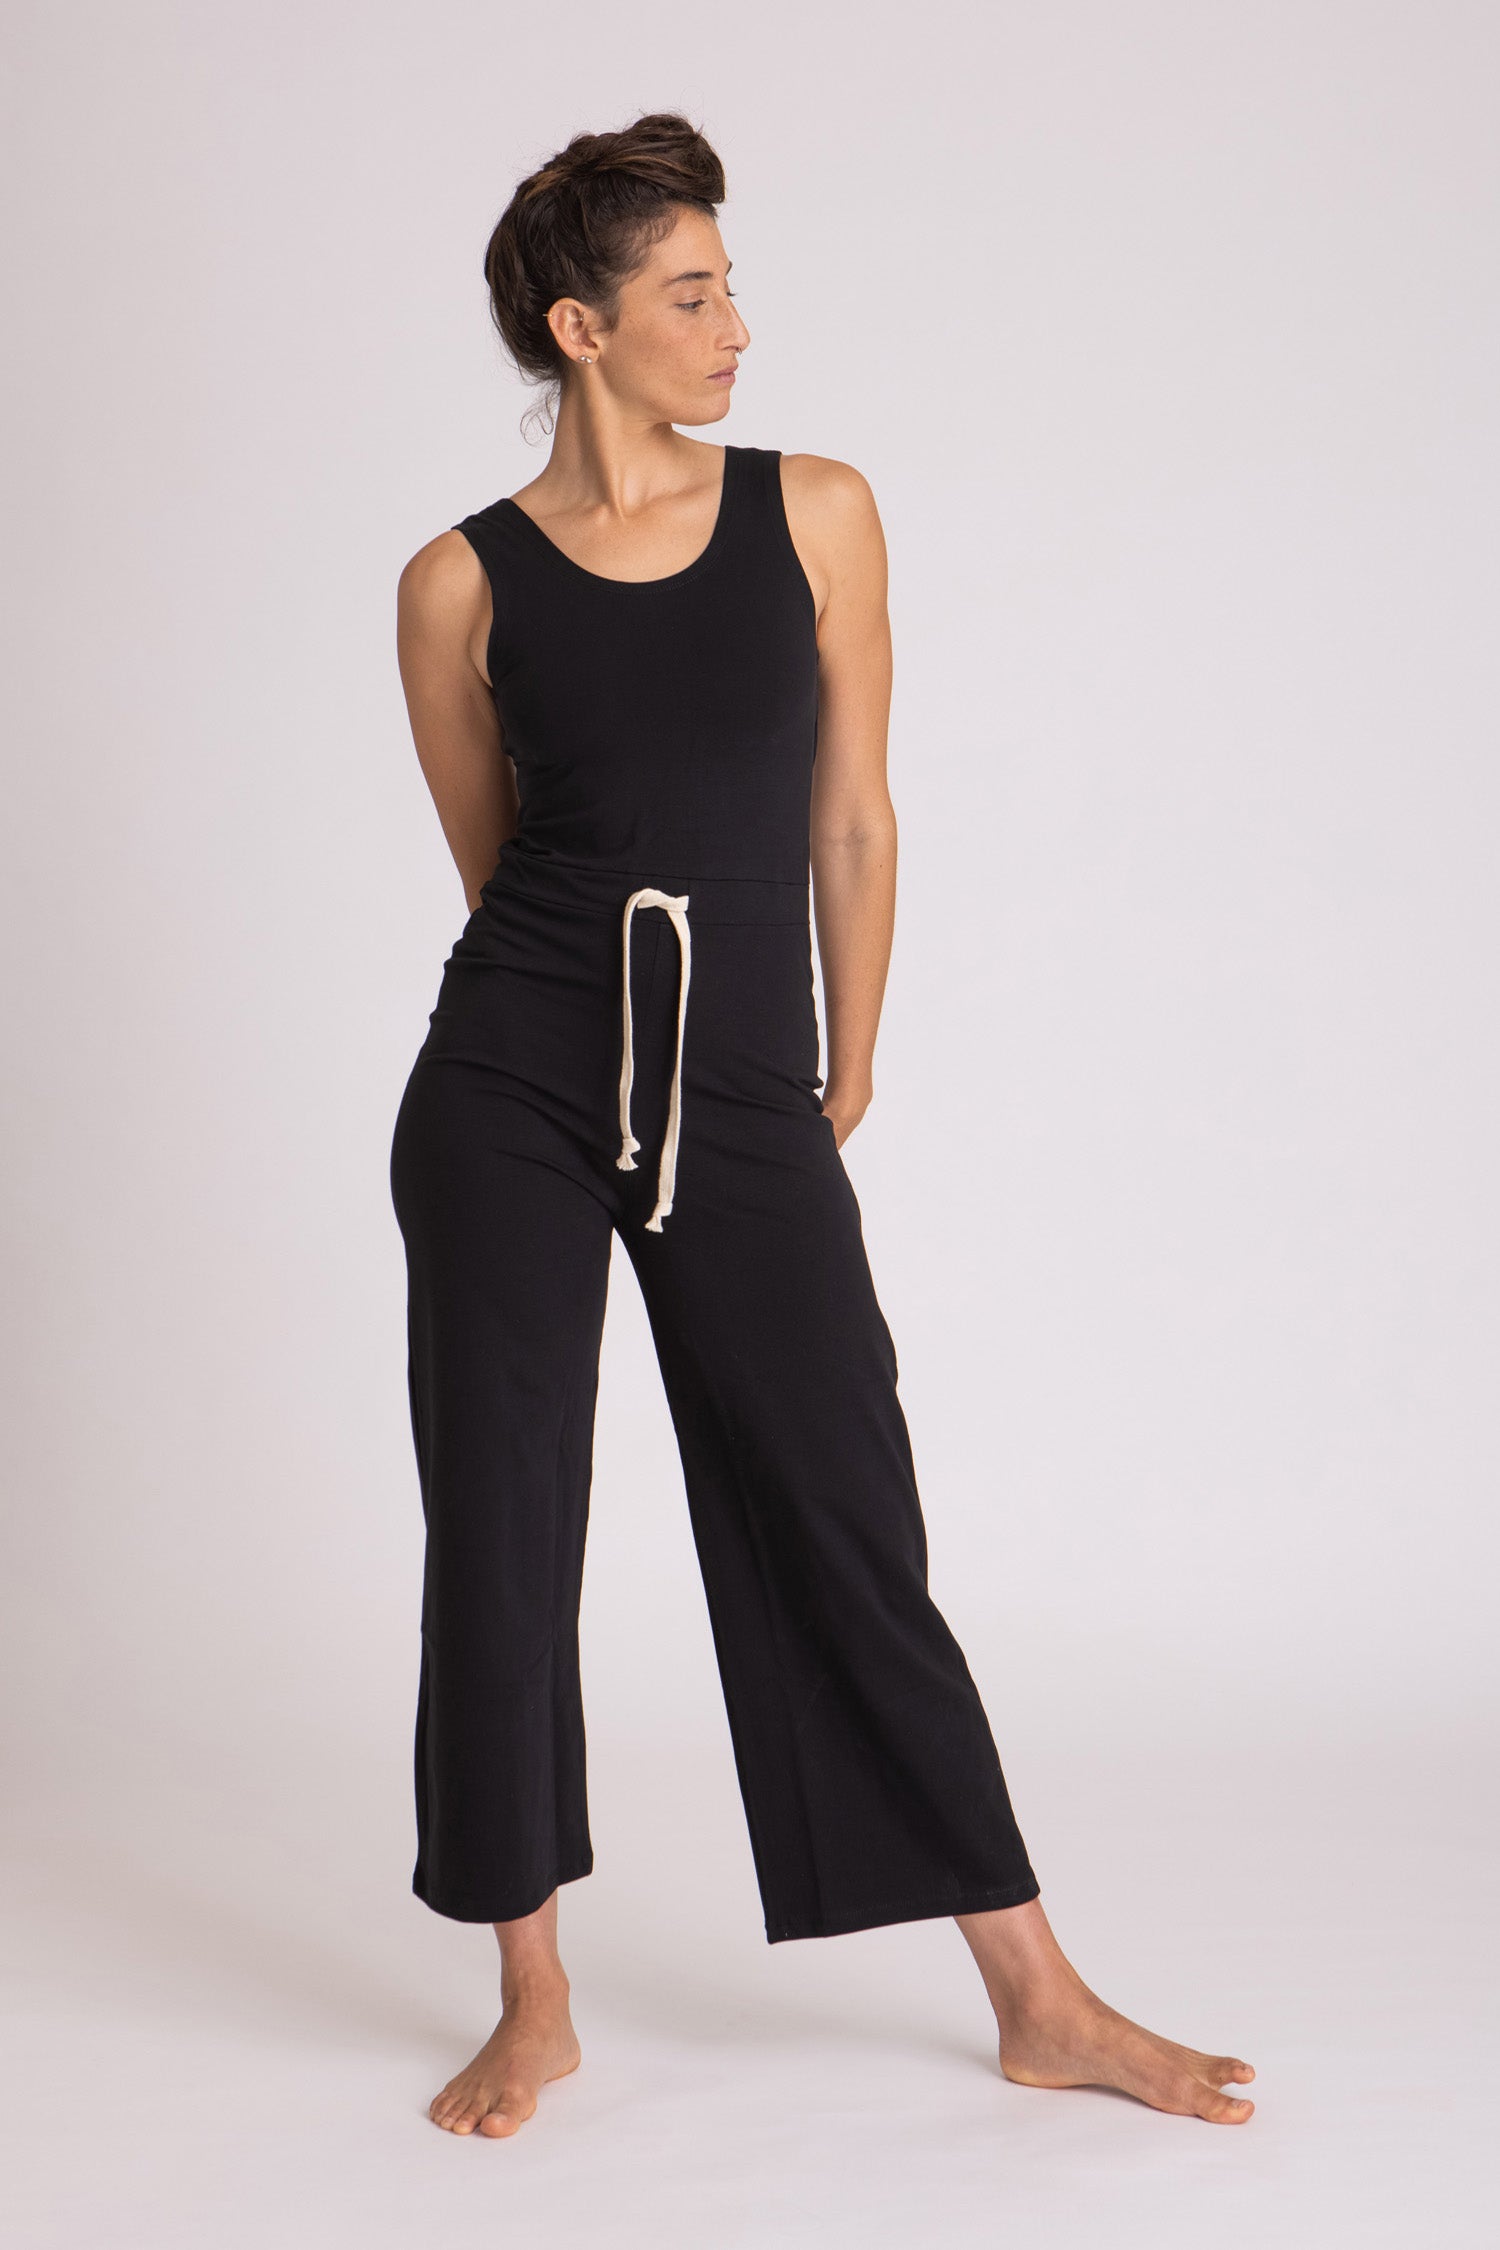 The 10 Best Yoga Jumpsuits that Are Both Stylish and Comfortable